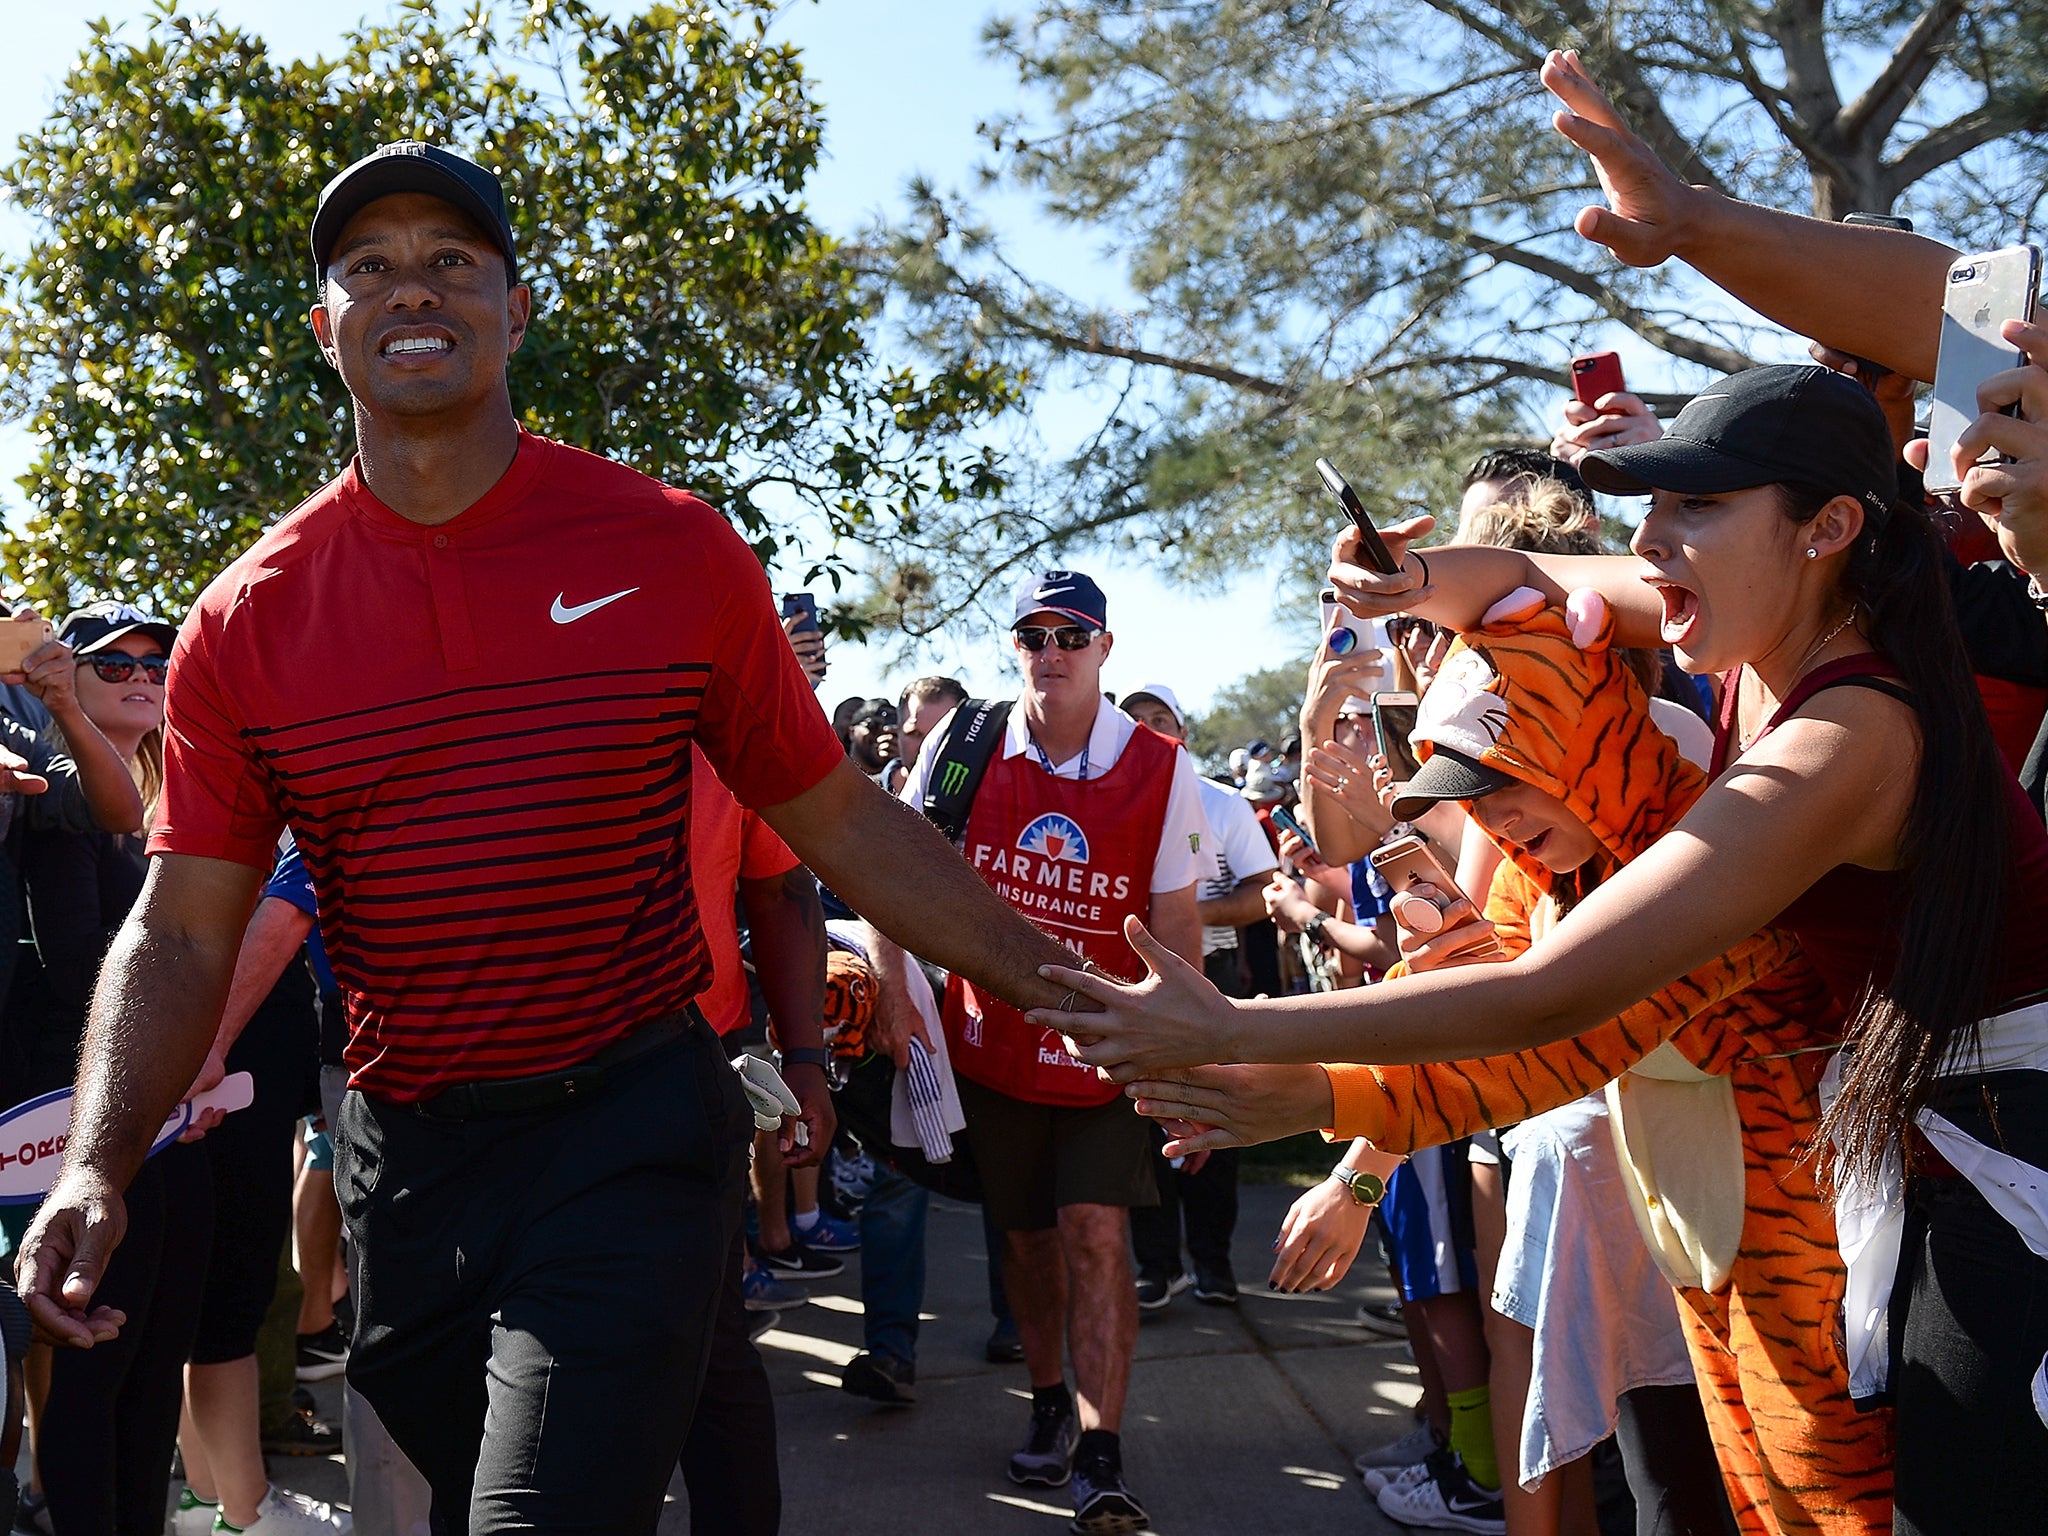 Tiger Woods enjoyed his comeback at Torrey Pines after securing a top-30 finish